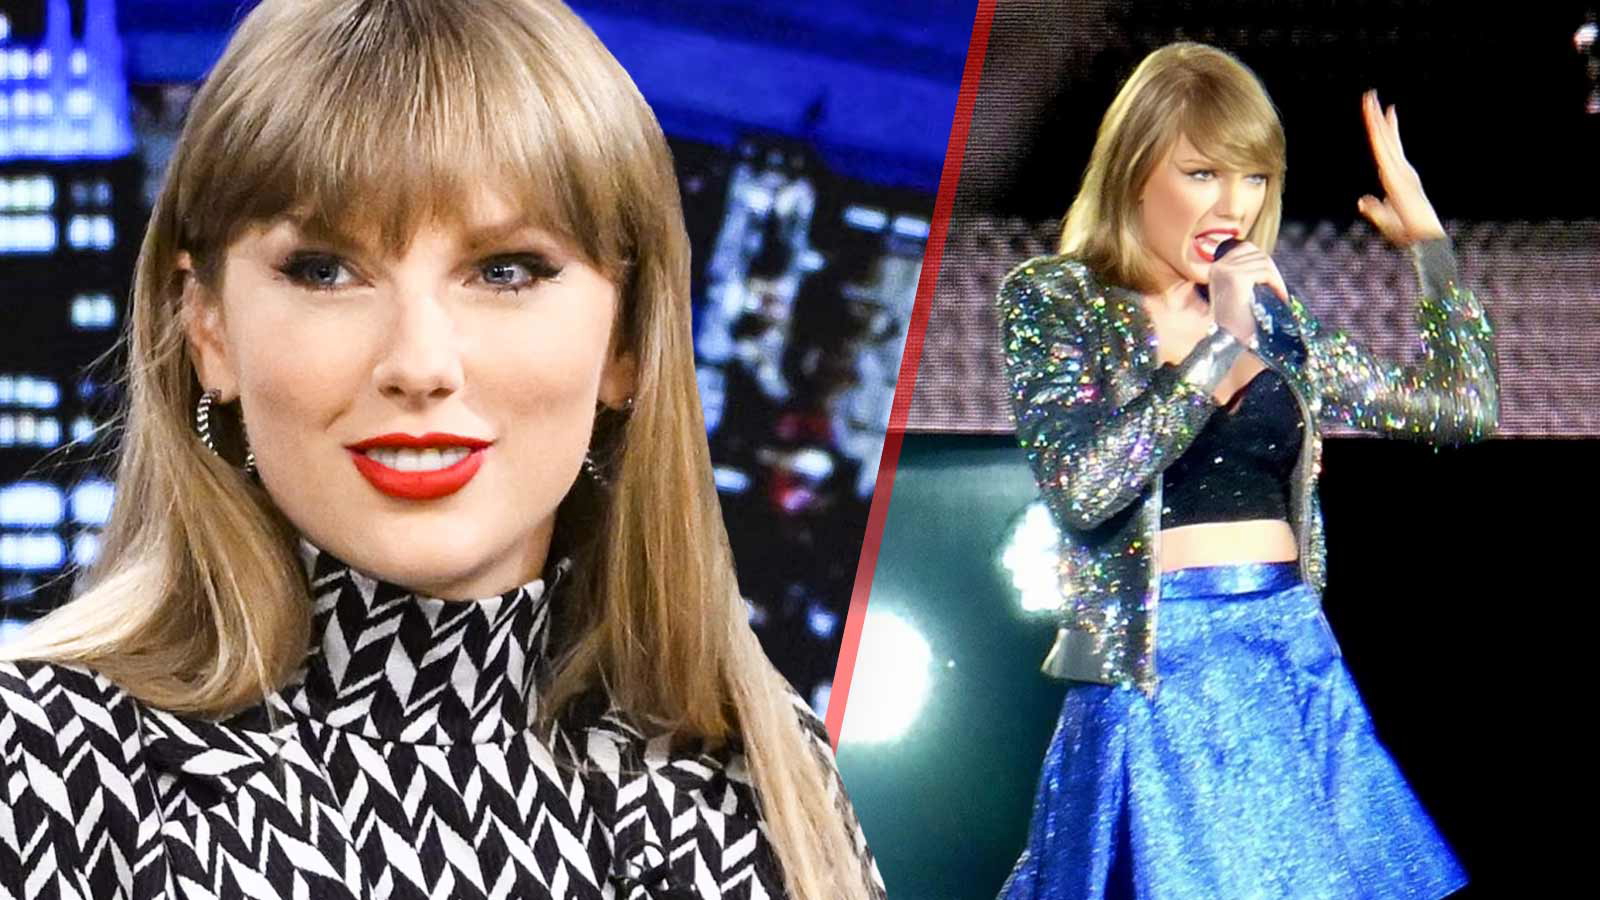 “I was wanting to sh*t myself”: Taylor Swift’s Eras Tour Performer Reveals the Insane Pressure She Was Under For Putting on a Spotless Show